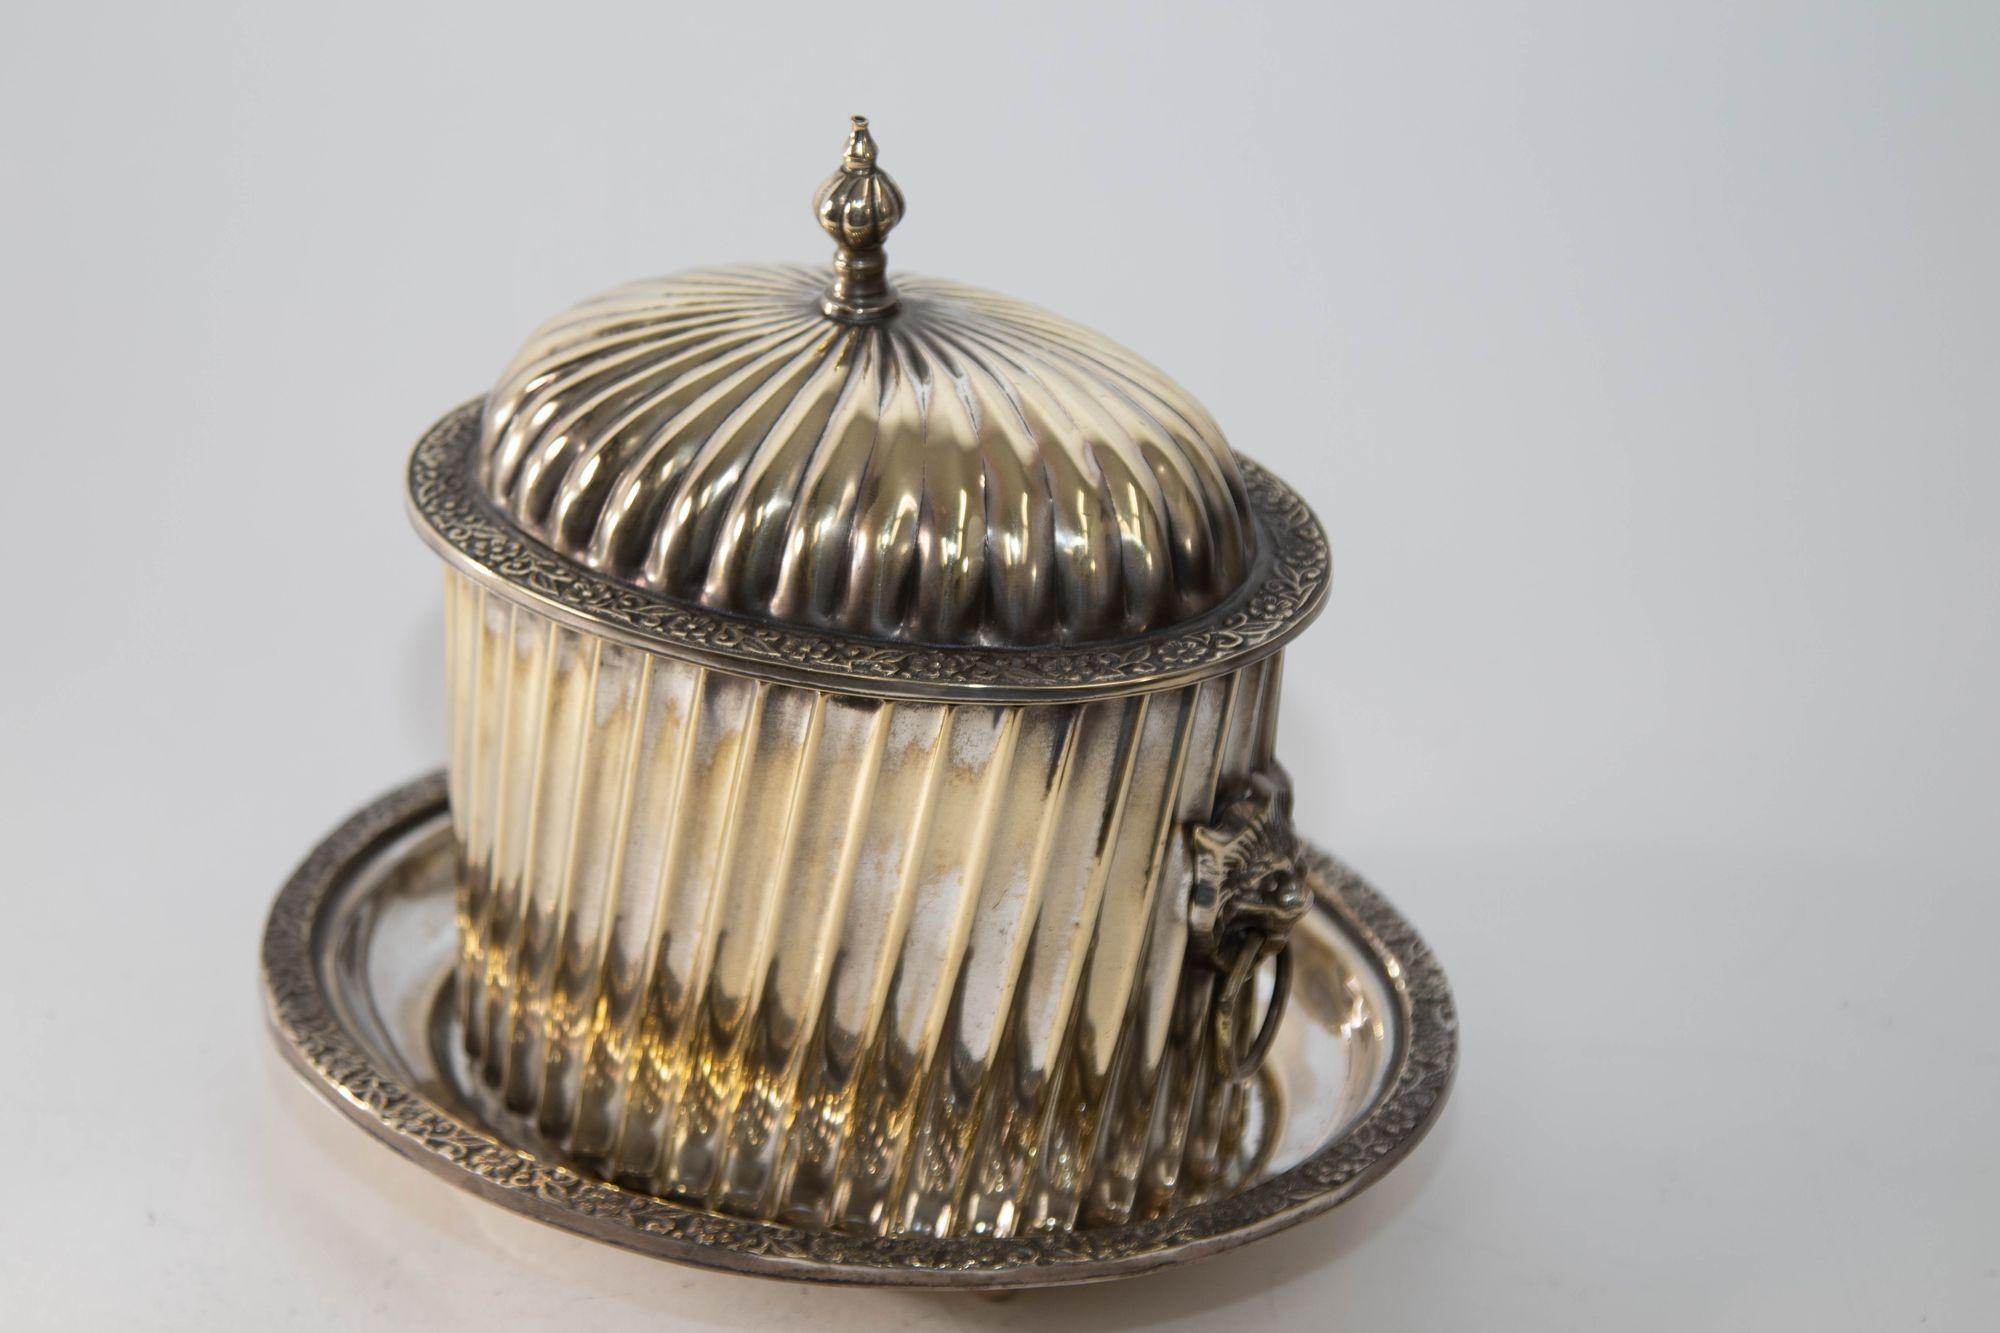 Hand-Crafted English Silver Plate Biscuit Box with Footed Plate and Lion Head Handles